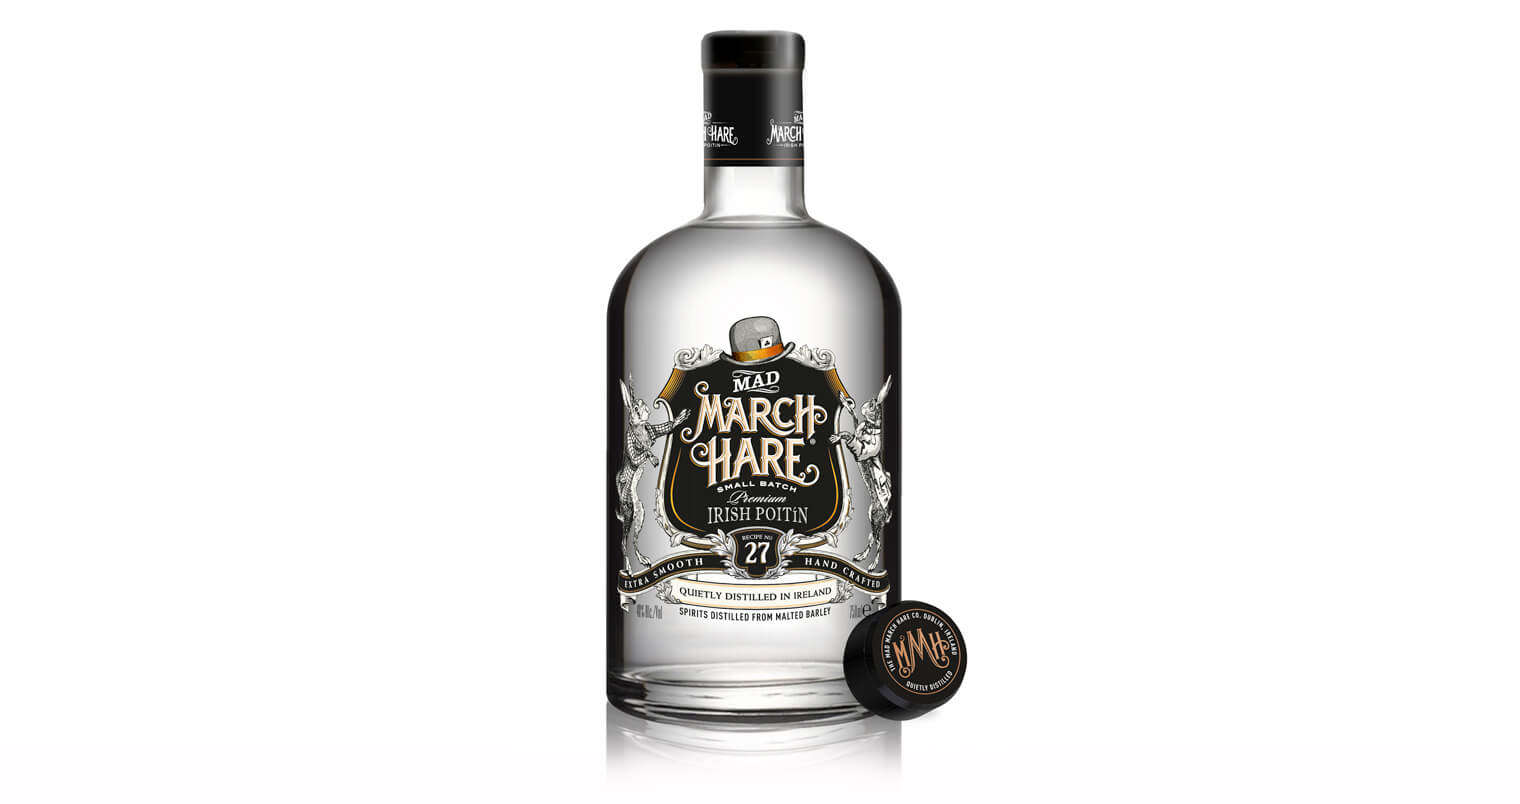 Mad March Hare Poitin Brings the Rich History of Irish Craft Distilling to the U.S., featured image featured brands